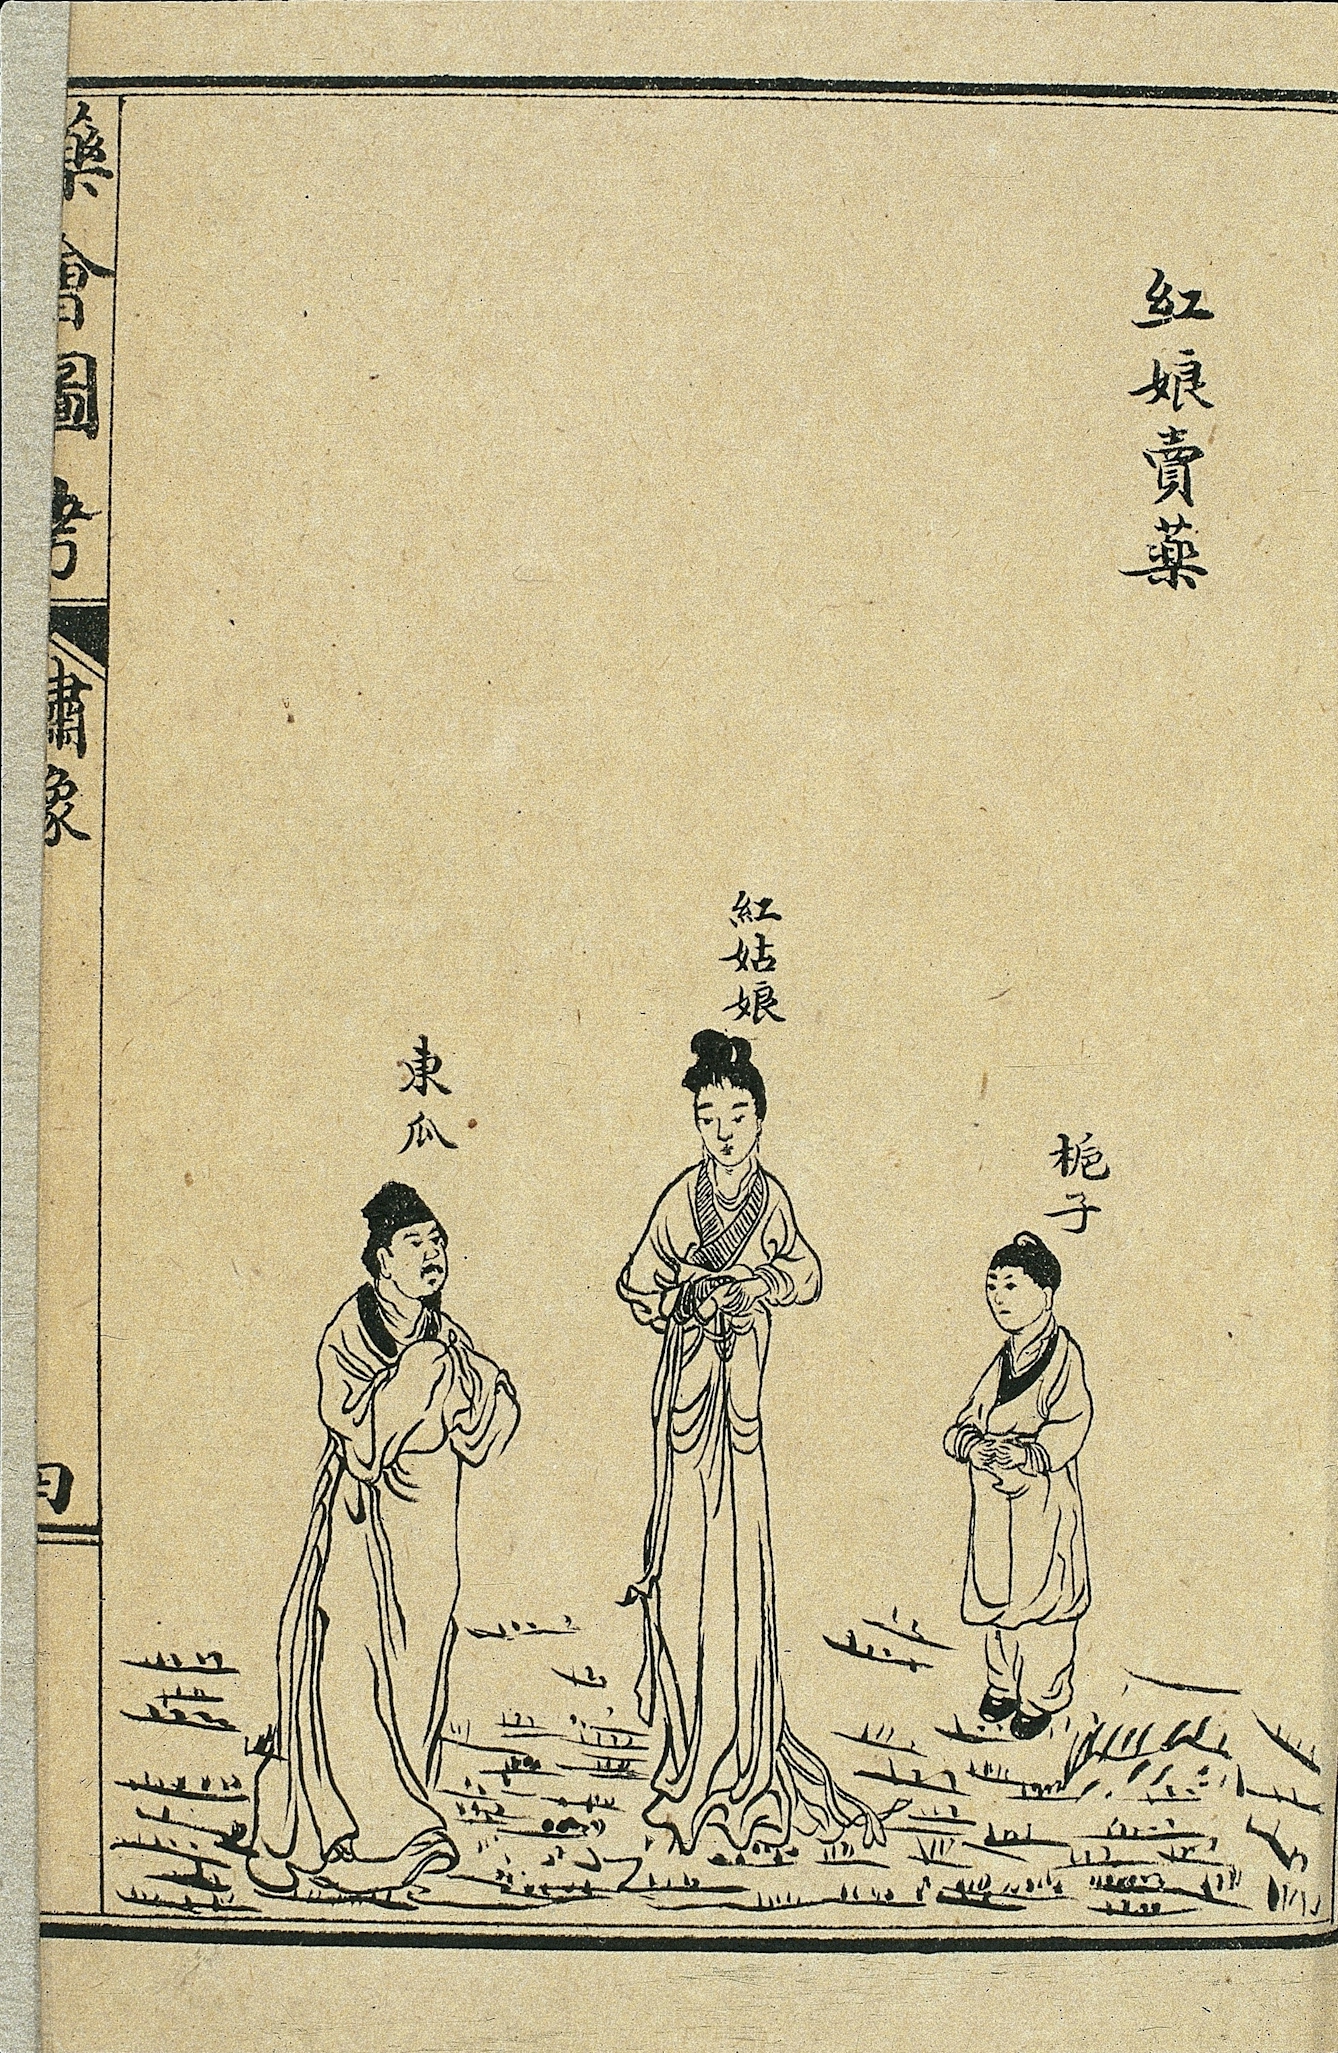 Three figures represent different drugs. They have Chinese characters above their heads representing dialogue where they explain the benefits of different remedies.